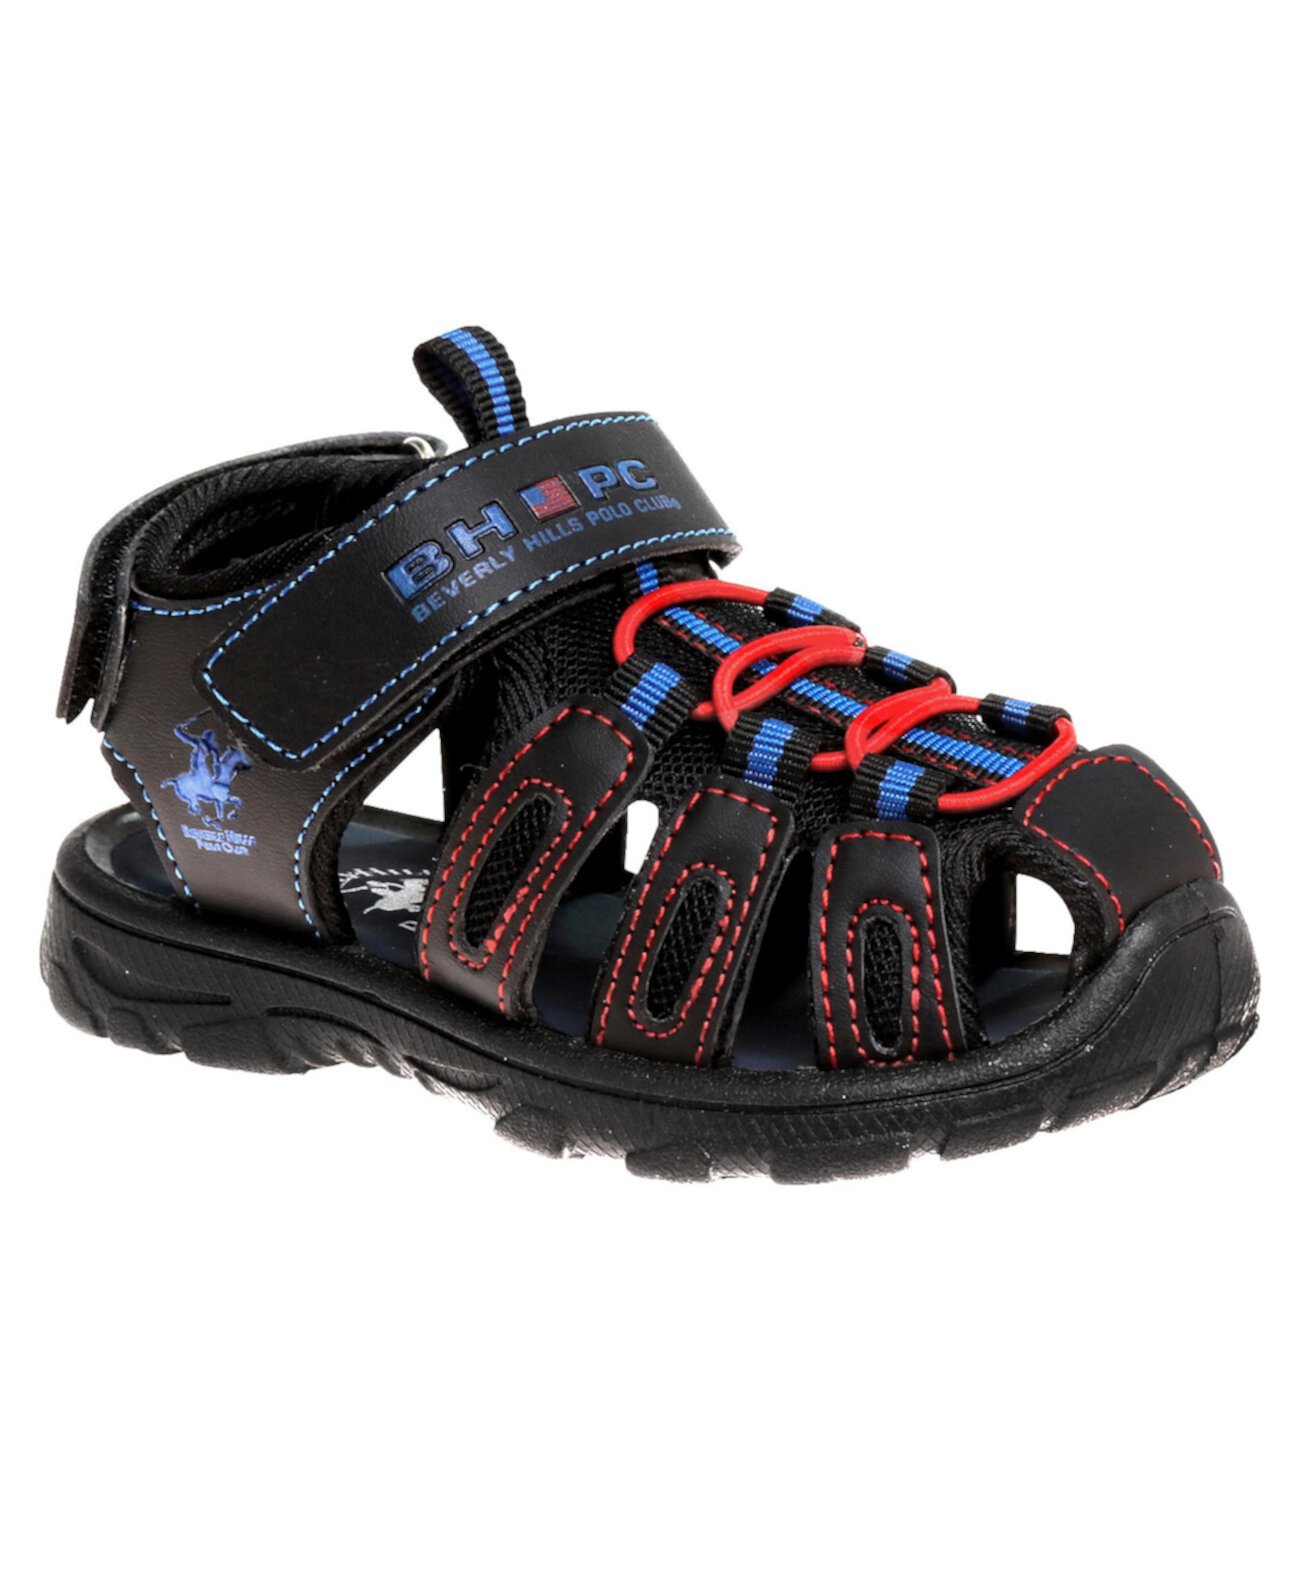 Little Kids Hook and Loop Sport Sandals Beverly Hills Polo